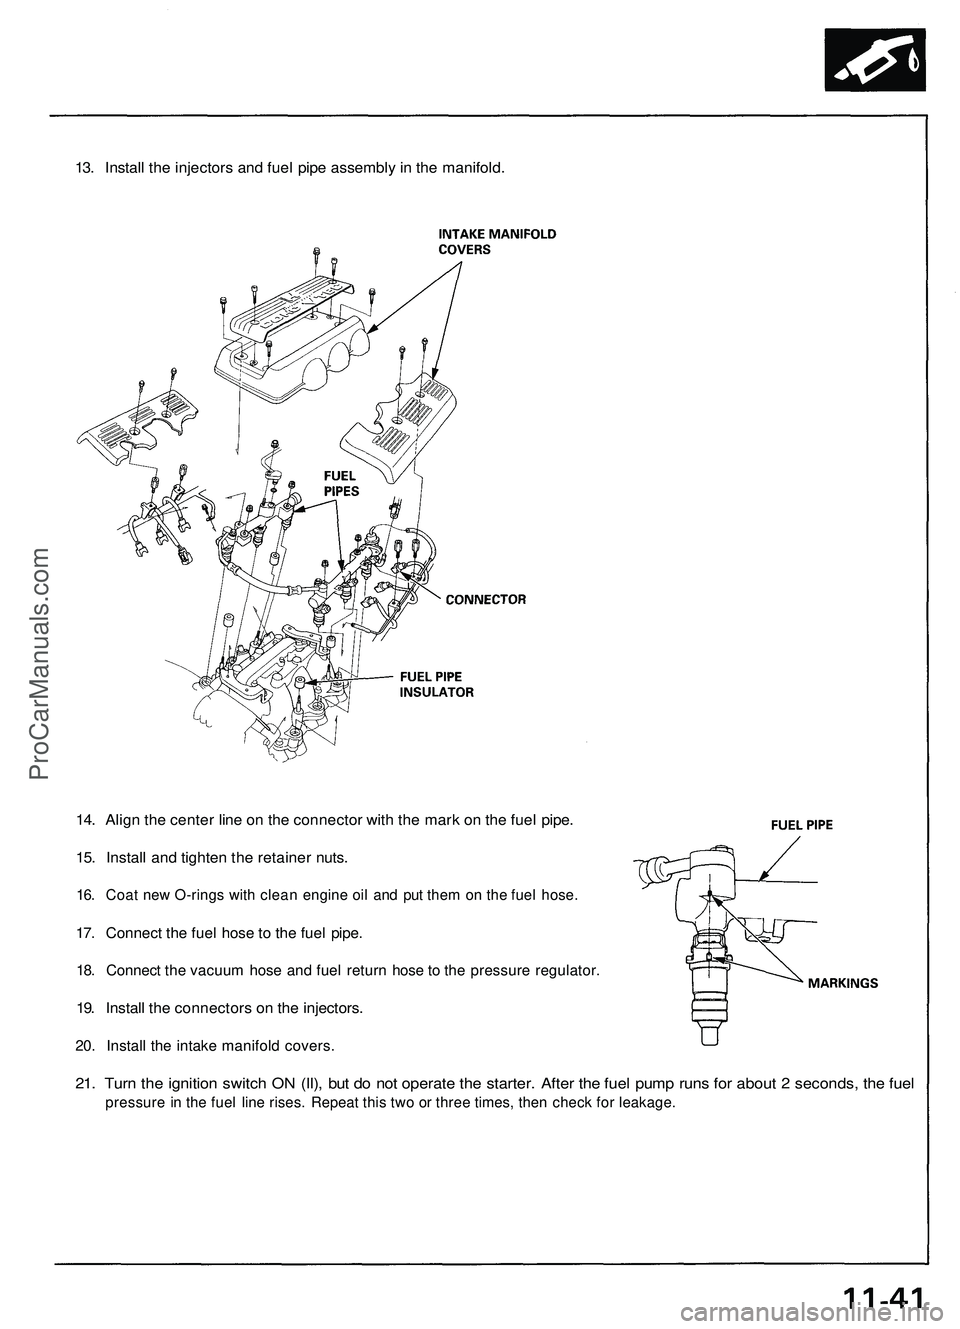 ACURA NSX 1997  Service Repair Manual 
13. Install the injectors and fuel pipe assembly in the manifold.

14. Align the center line on the connector with the mark on the fuel pipe.

15. Install and tighten the retainer nuts.

16. Coat new